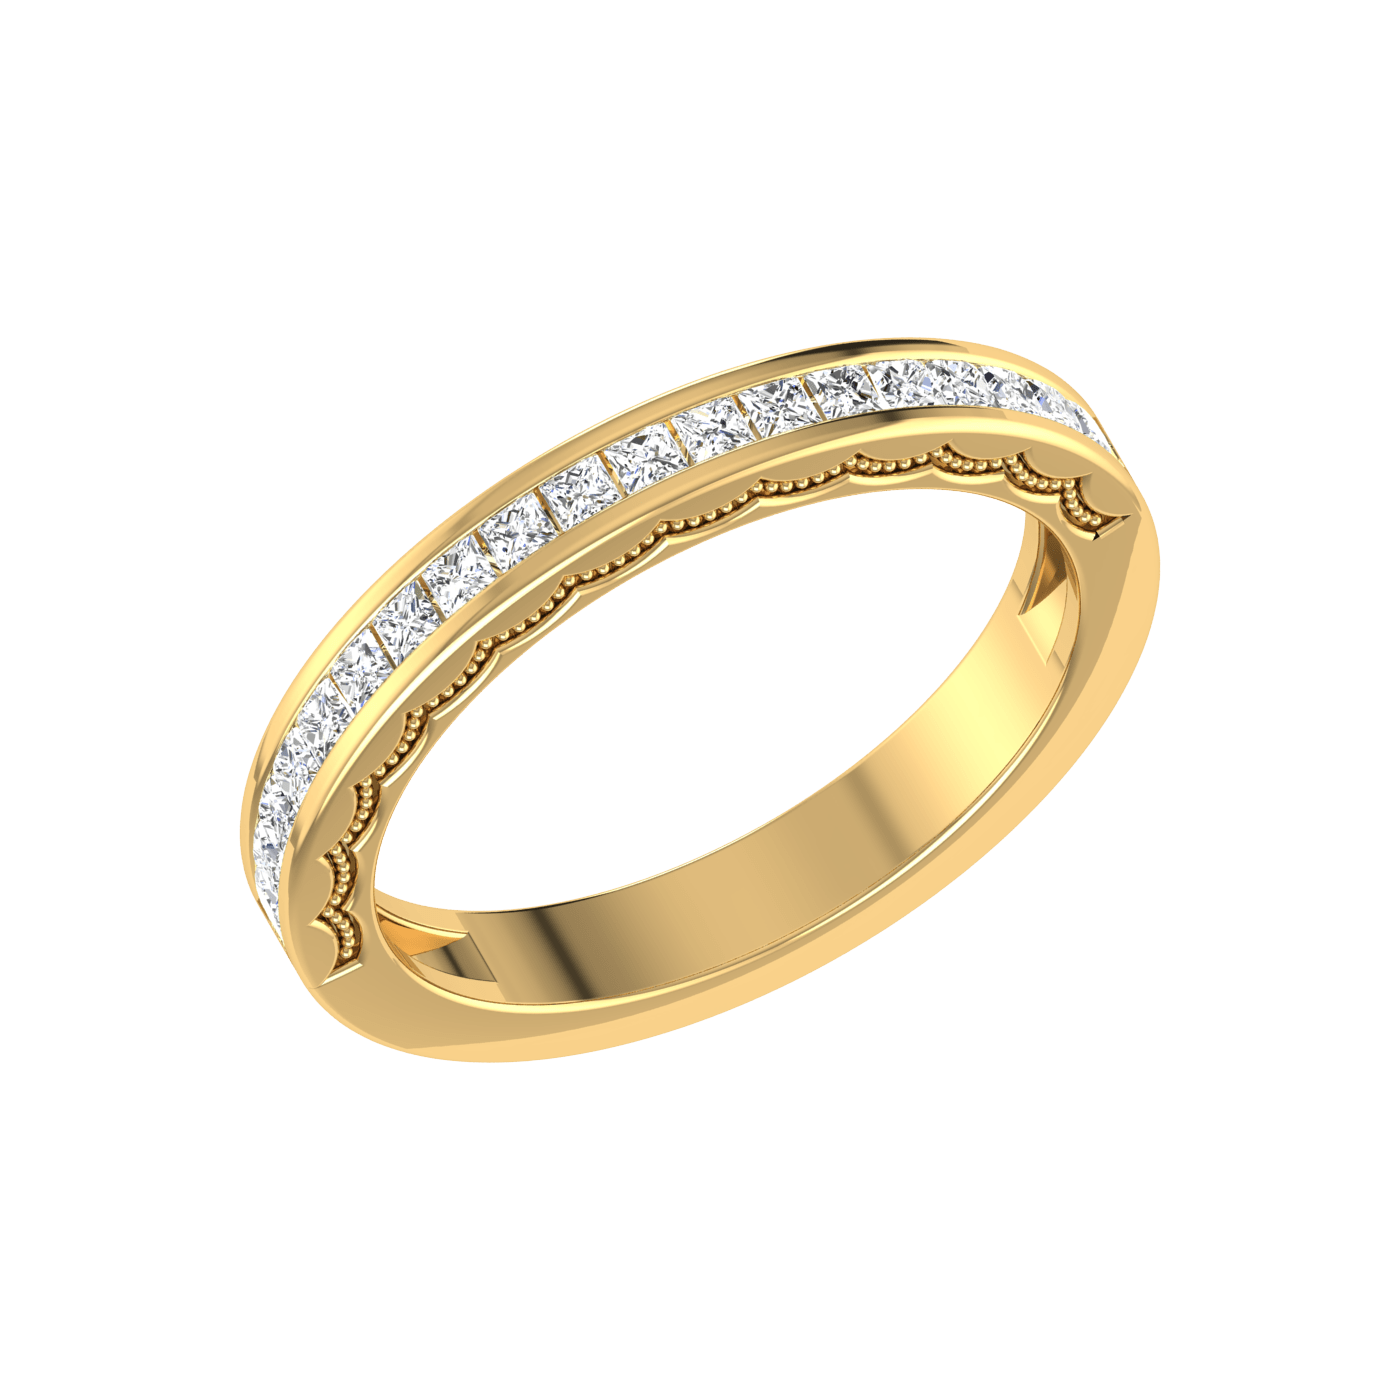 Buy Malabar Gold and Diamonds 18 KT (750) purity White Gold Mine Diamond  Ring KRJRN11770Q_W_VVSVS-GH for Women at Amazon.in